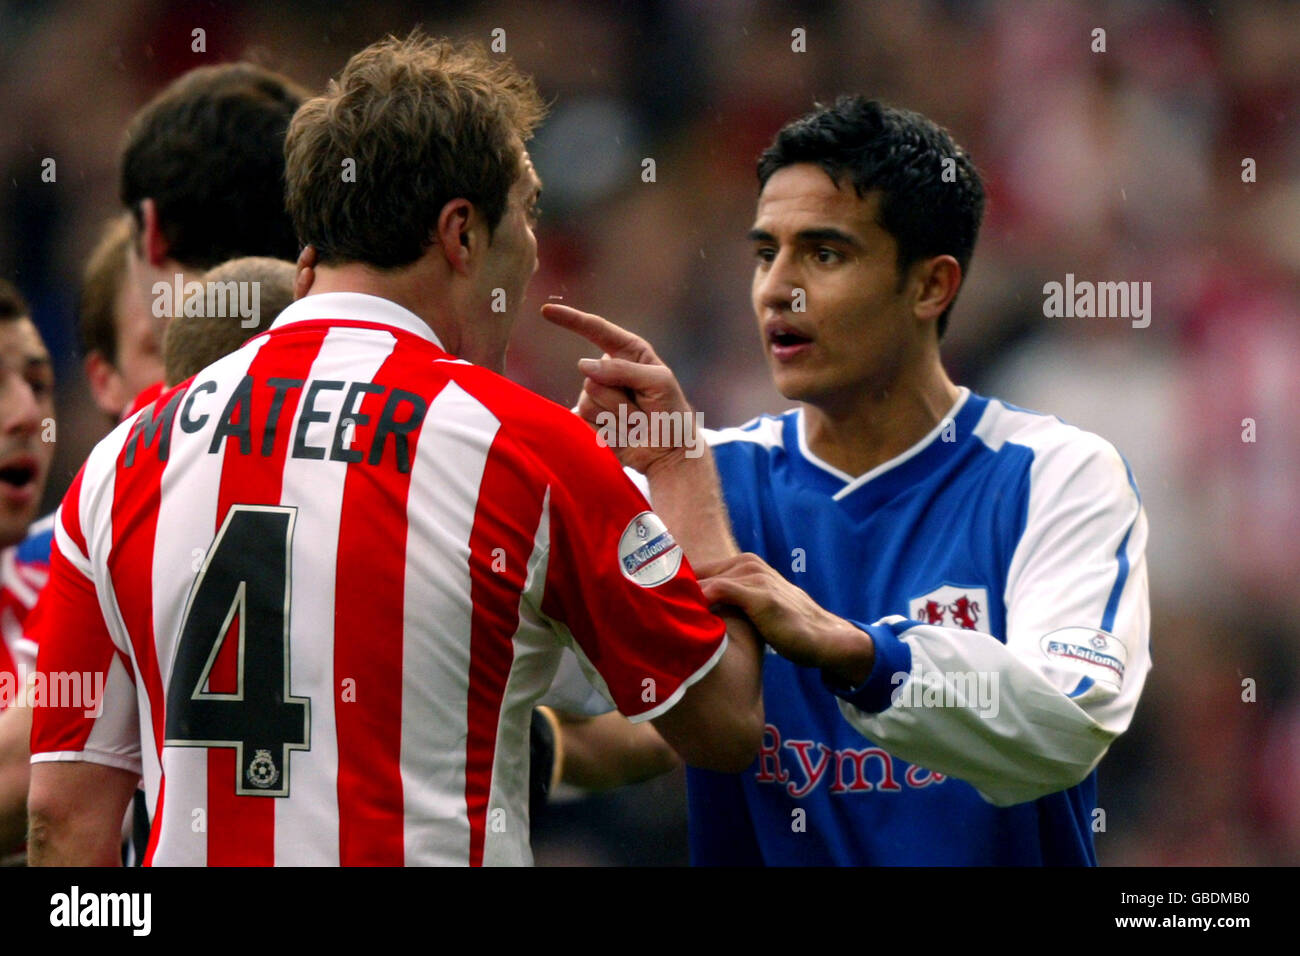 Soccer - AXA FA Cup - Semi Final - Sunderland v Millwall. Sunderland's Jason McAteer (l) and Millwall's Tim Cahill have a difference of opinions Stock Photo